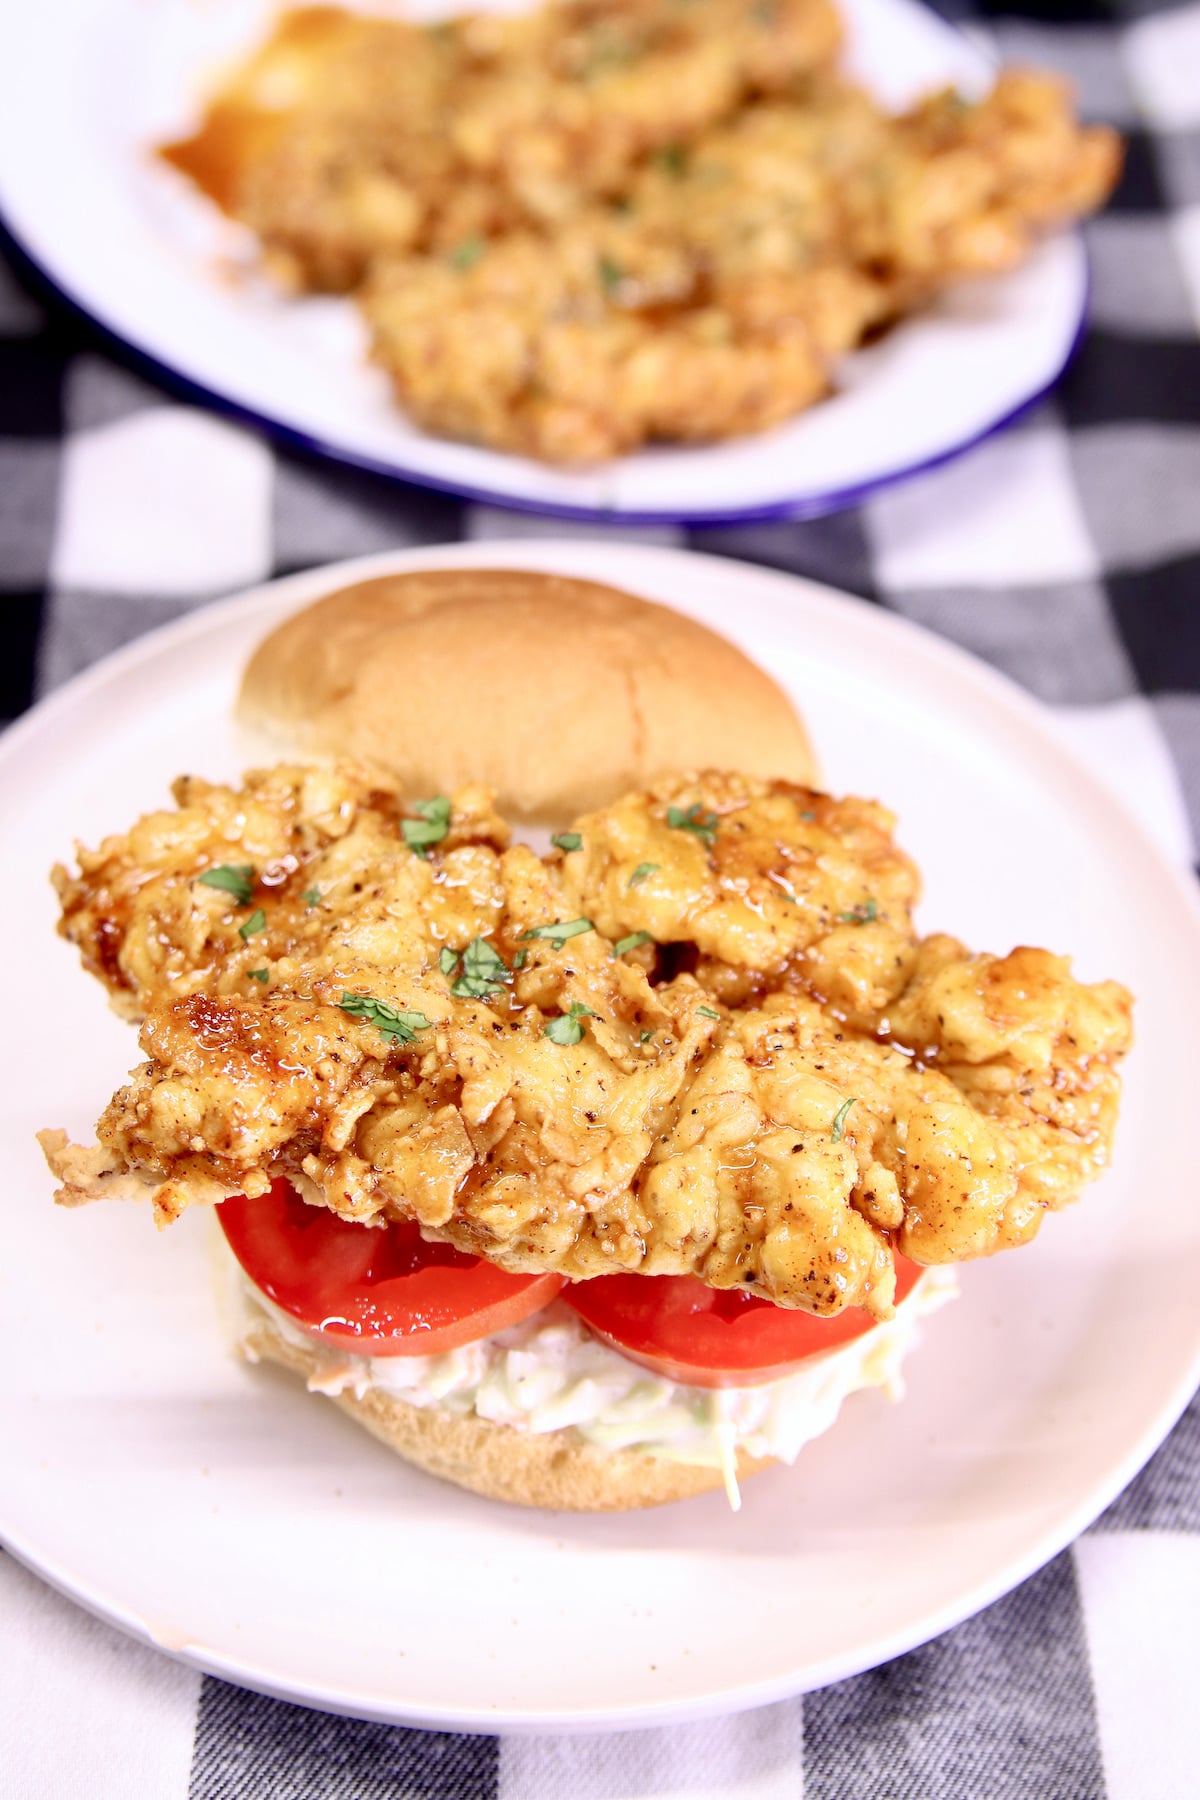 Chicken Tender Sandwich with slaw and tomatoes.